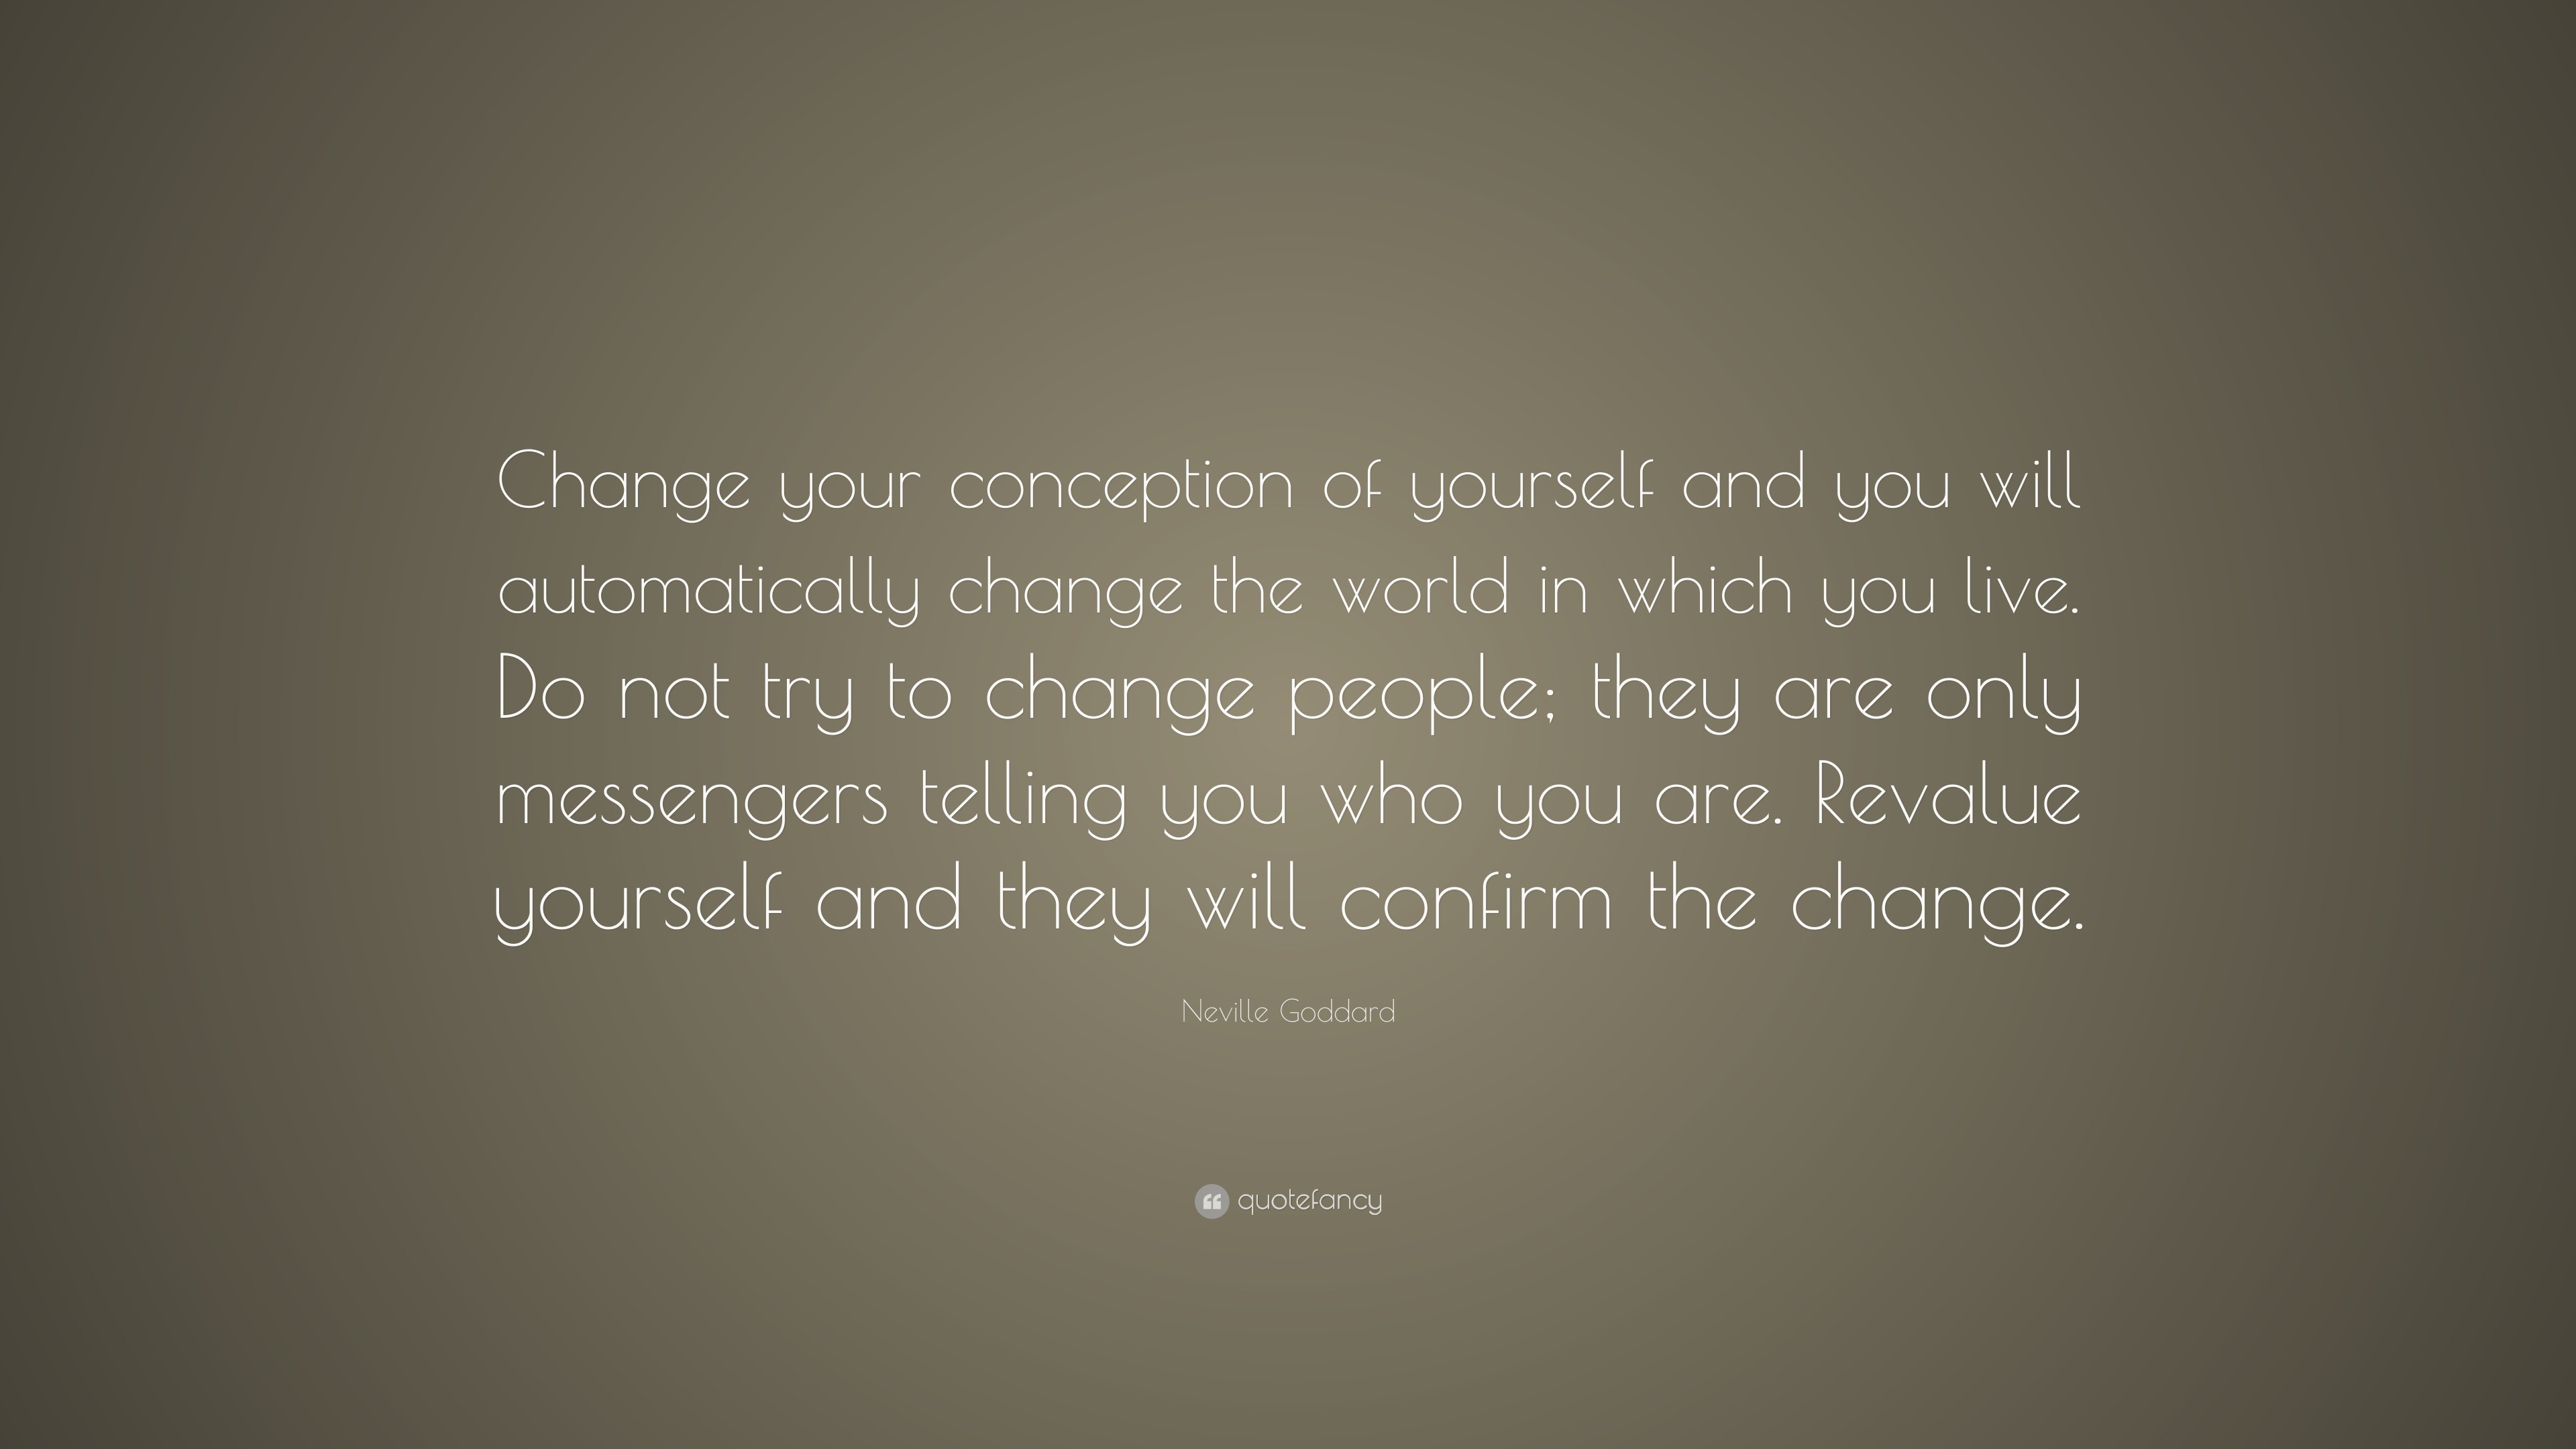 Neville Goddard Quote: “Change your conception of yourself and you will ...